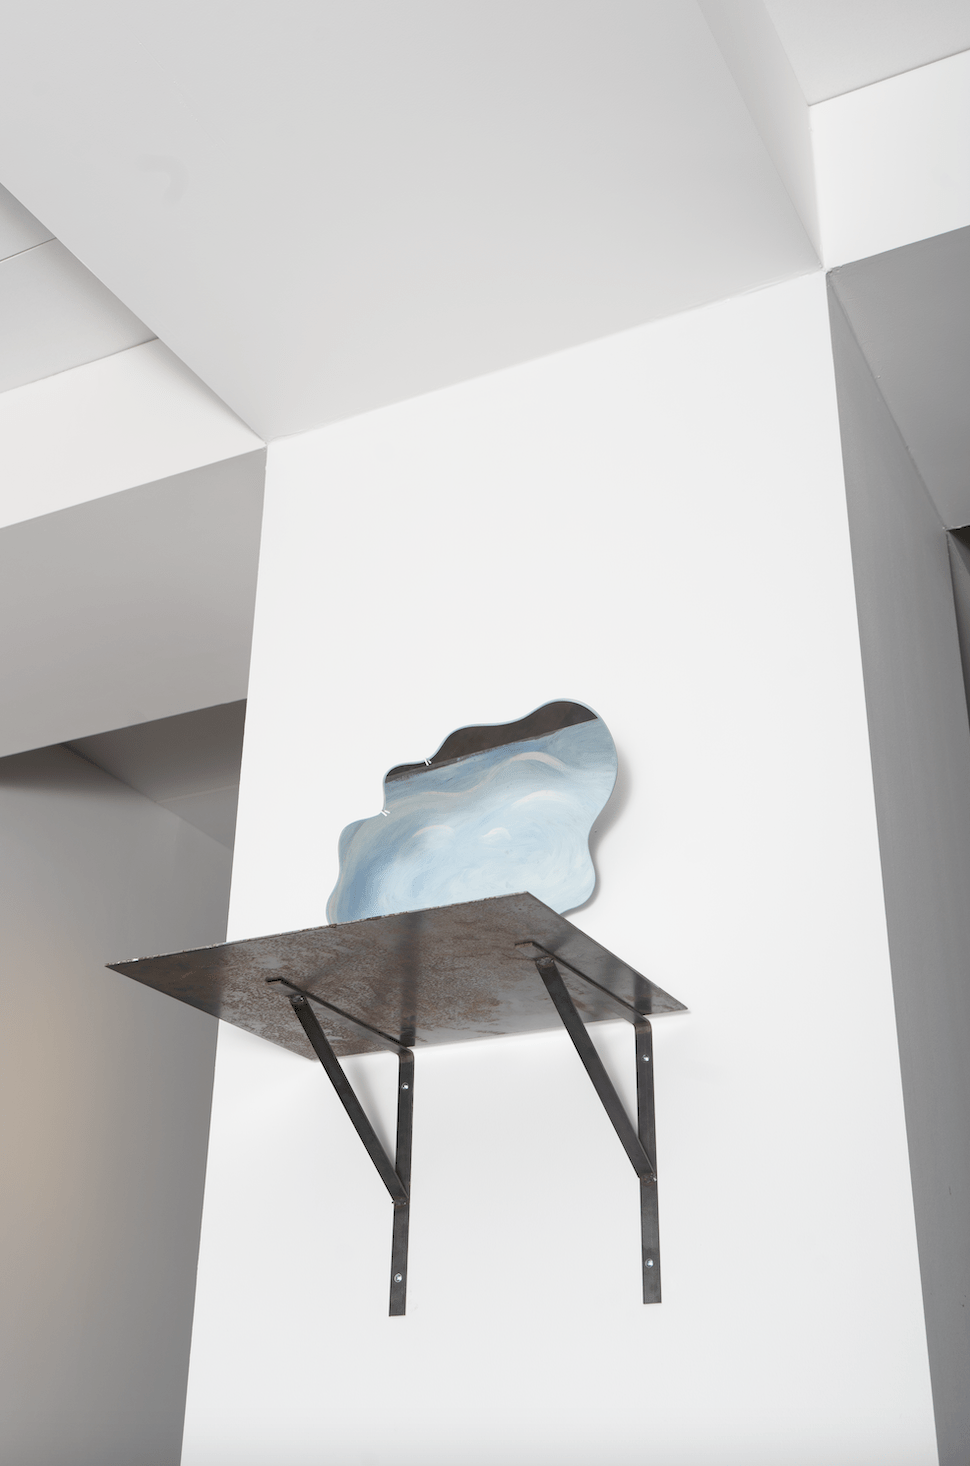 Image from Mirror Paintings, a Story of Reflection - Cloud by Allen & Overy